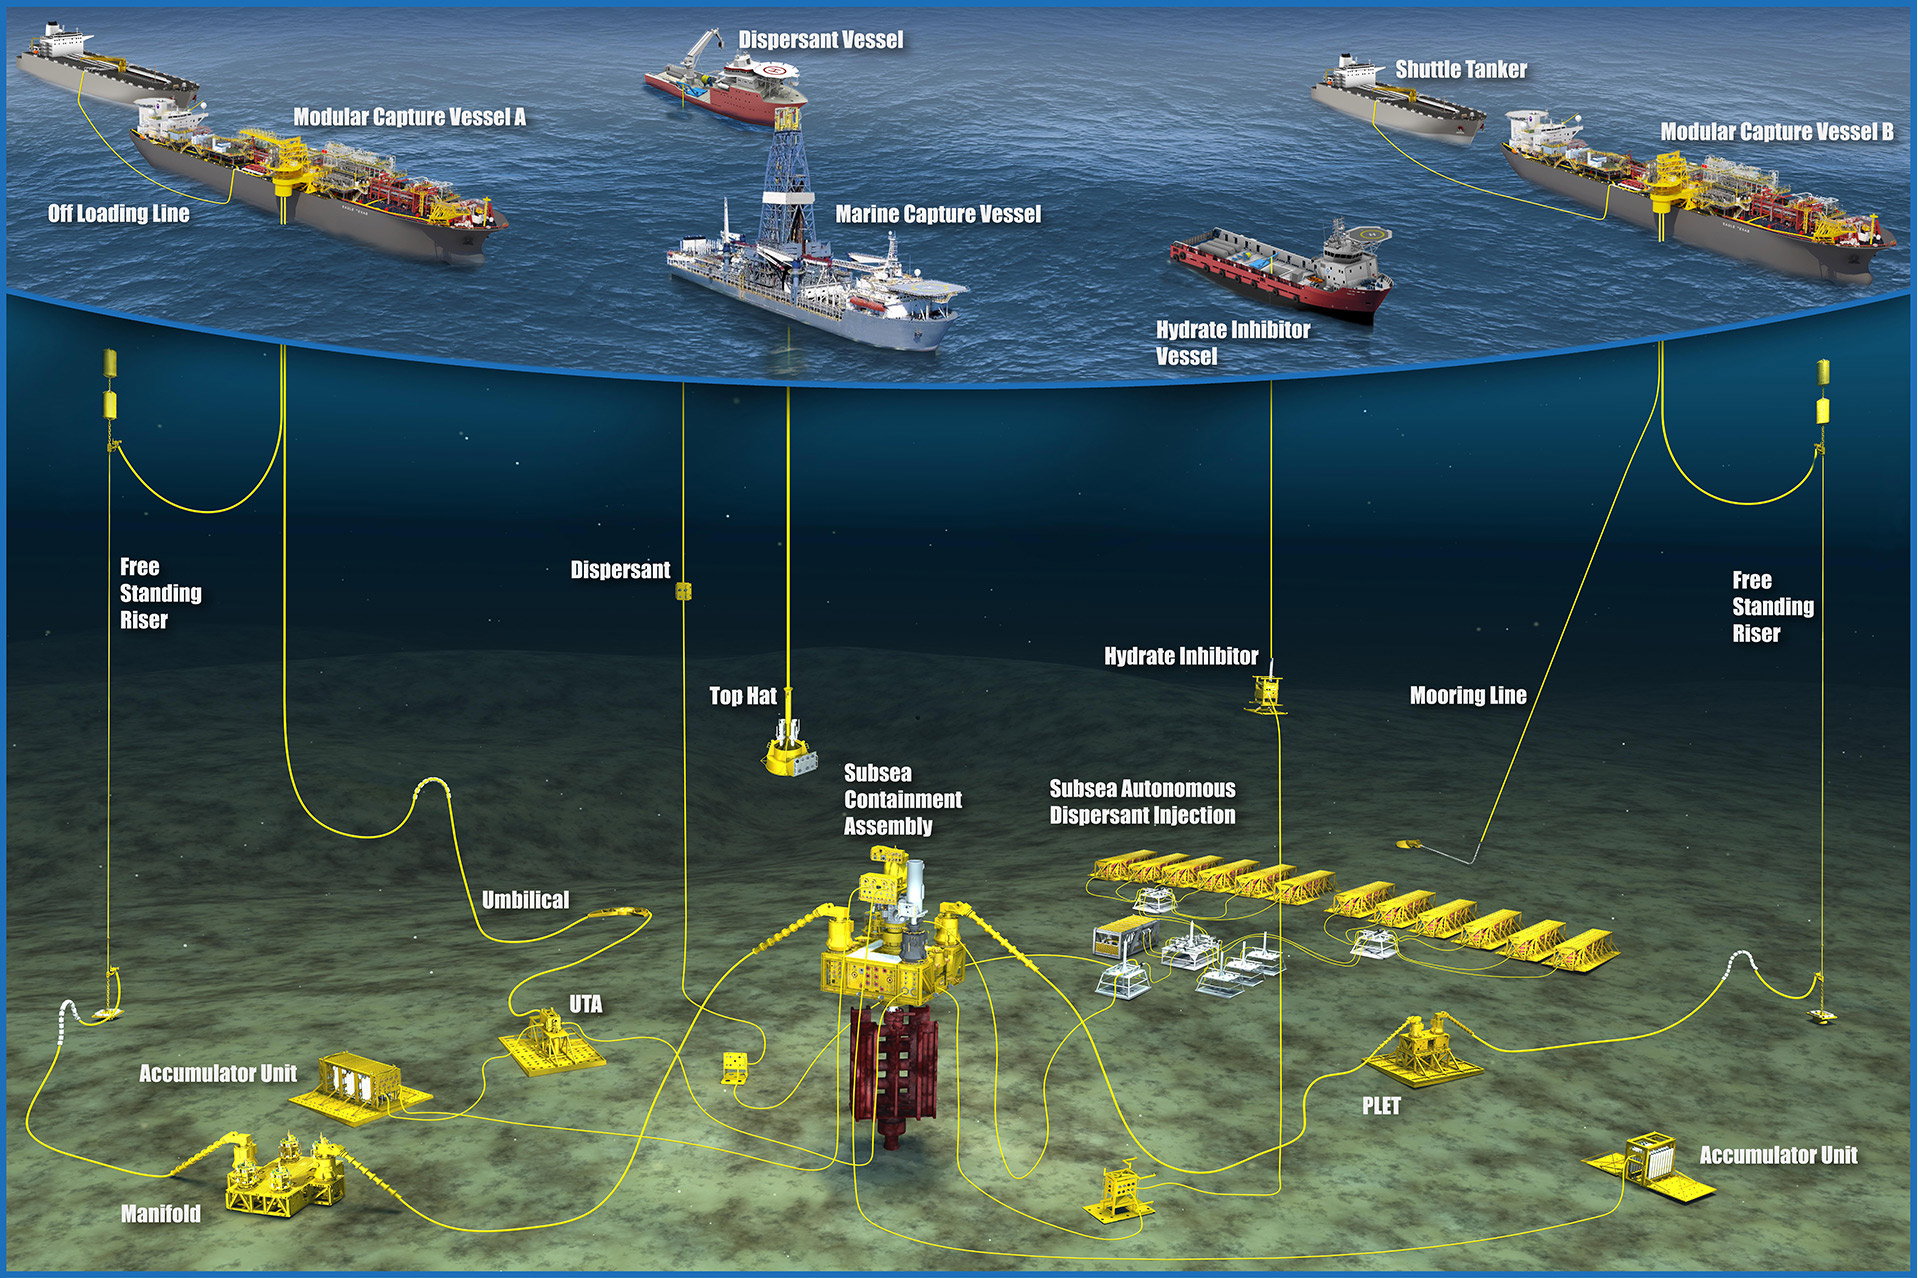 Image Photo Marine Well Containment System overview